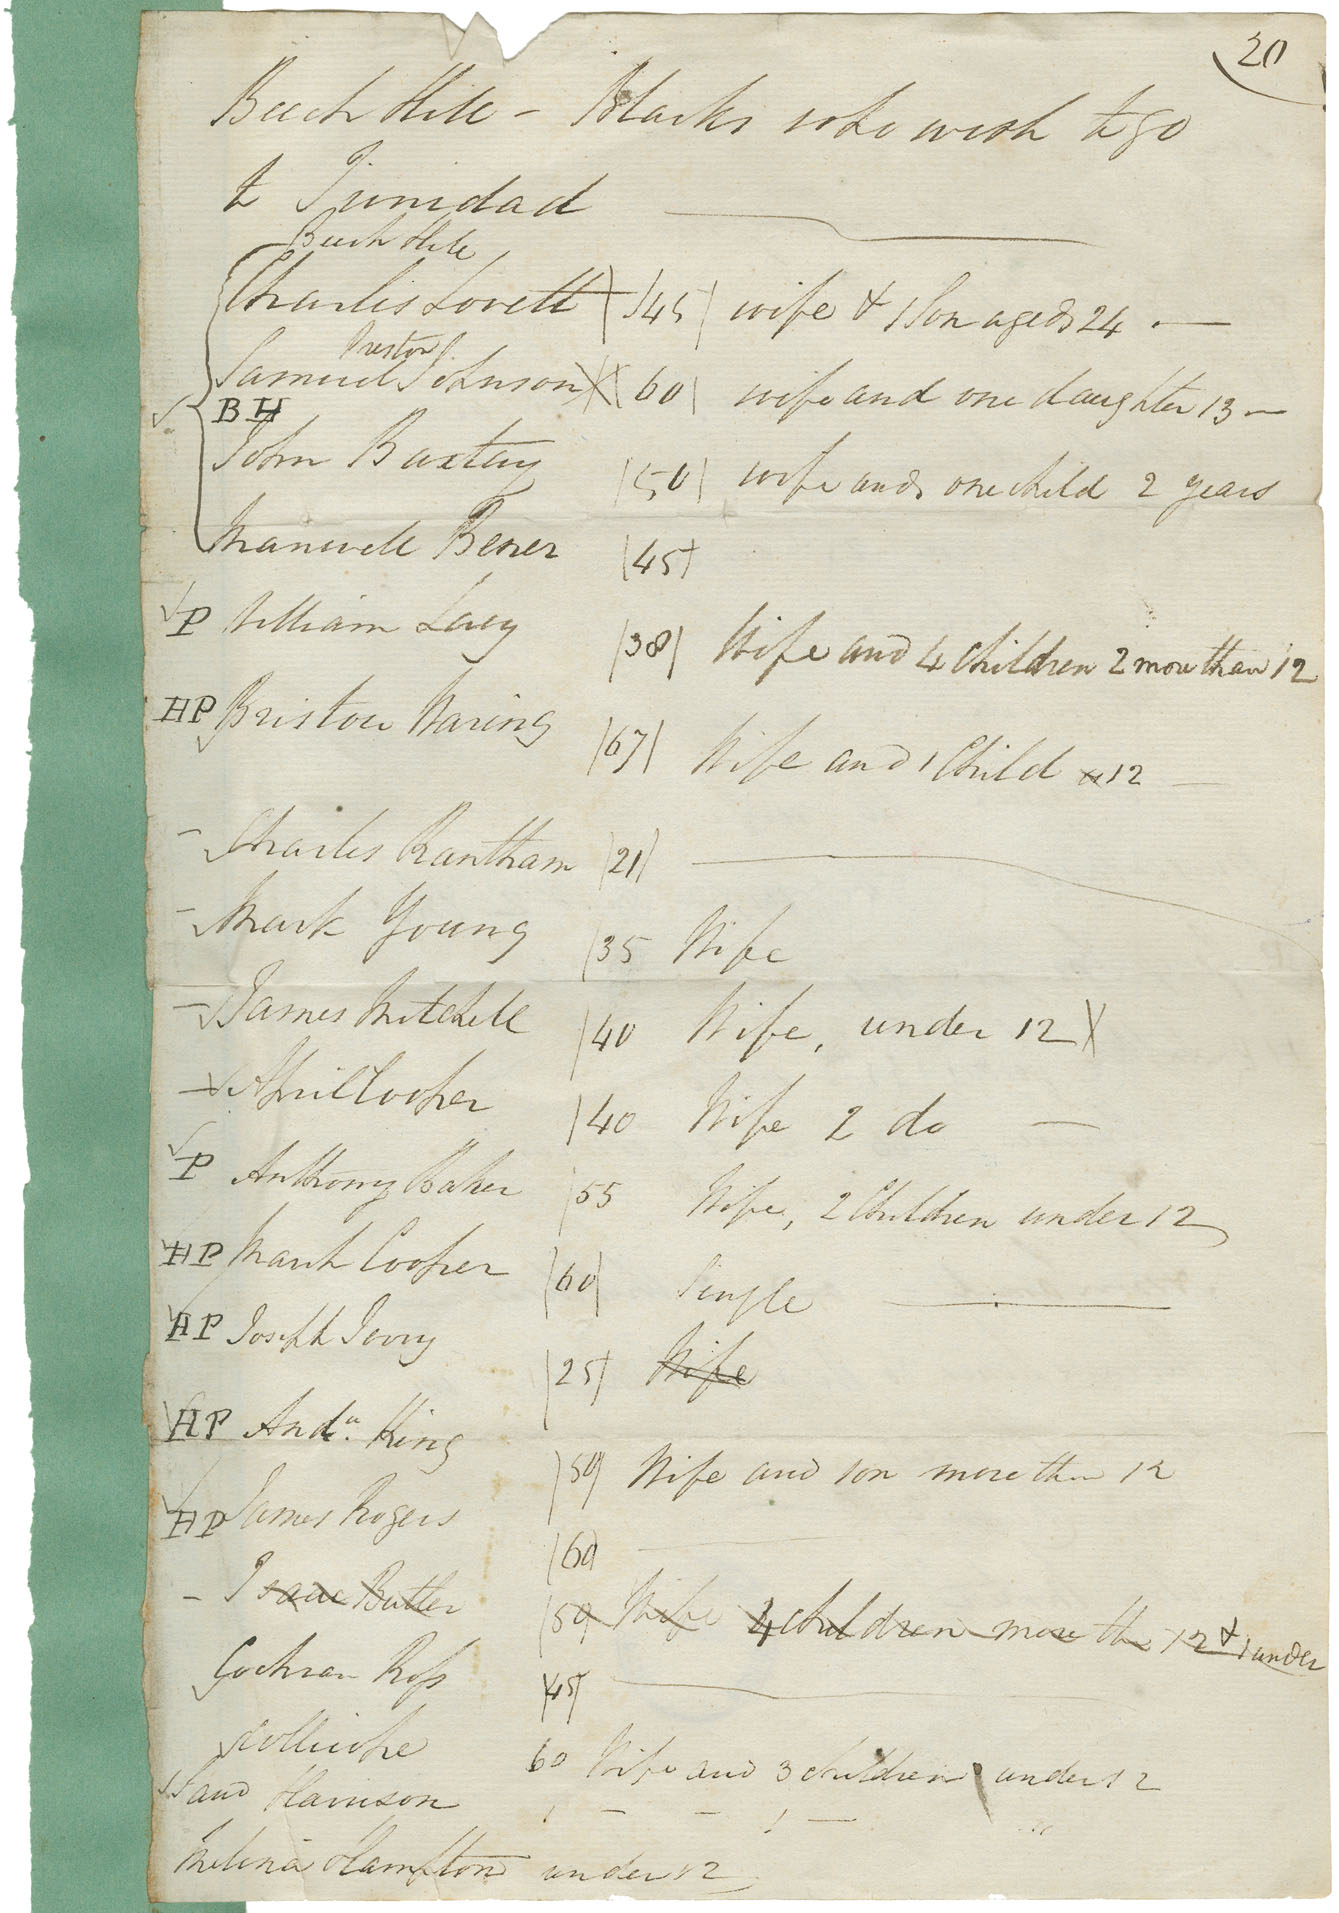 A list of Black Refugees at Beech Hill (Beechville) settlement who wished to go to Trinidad. No date